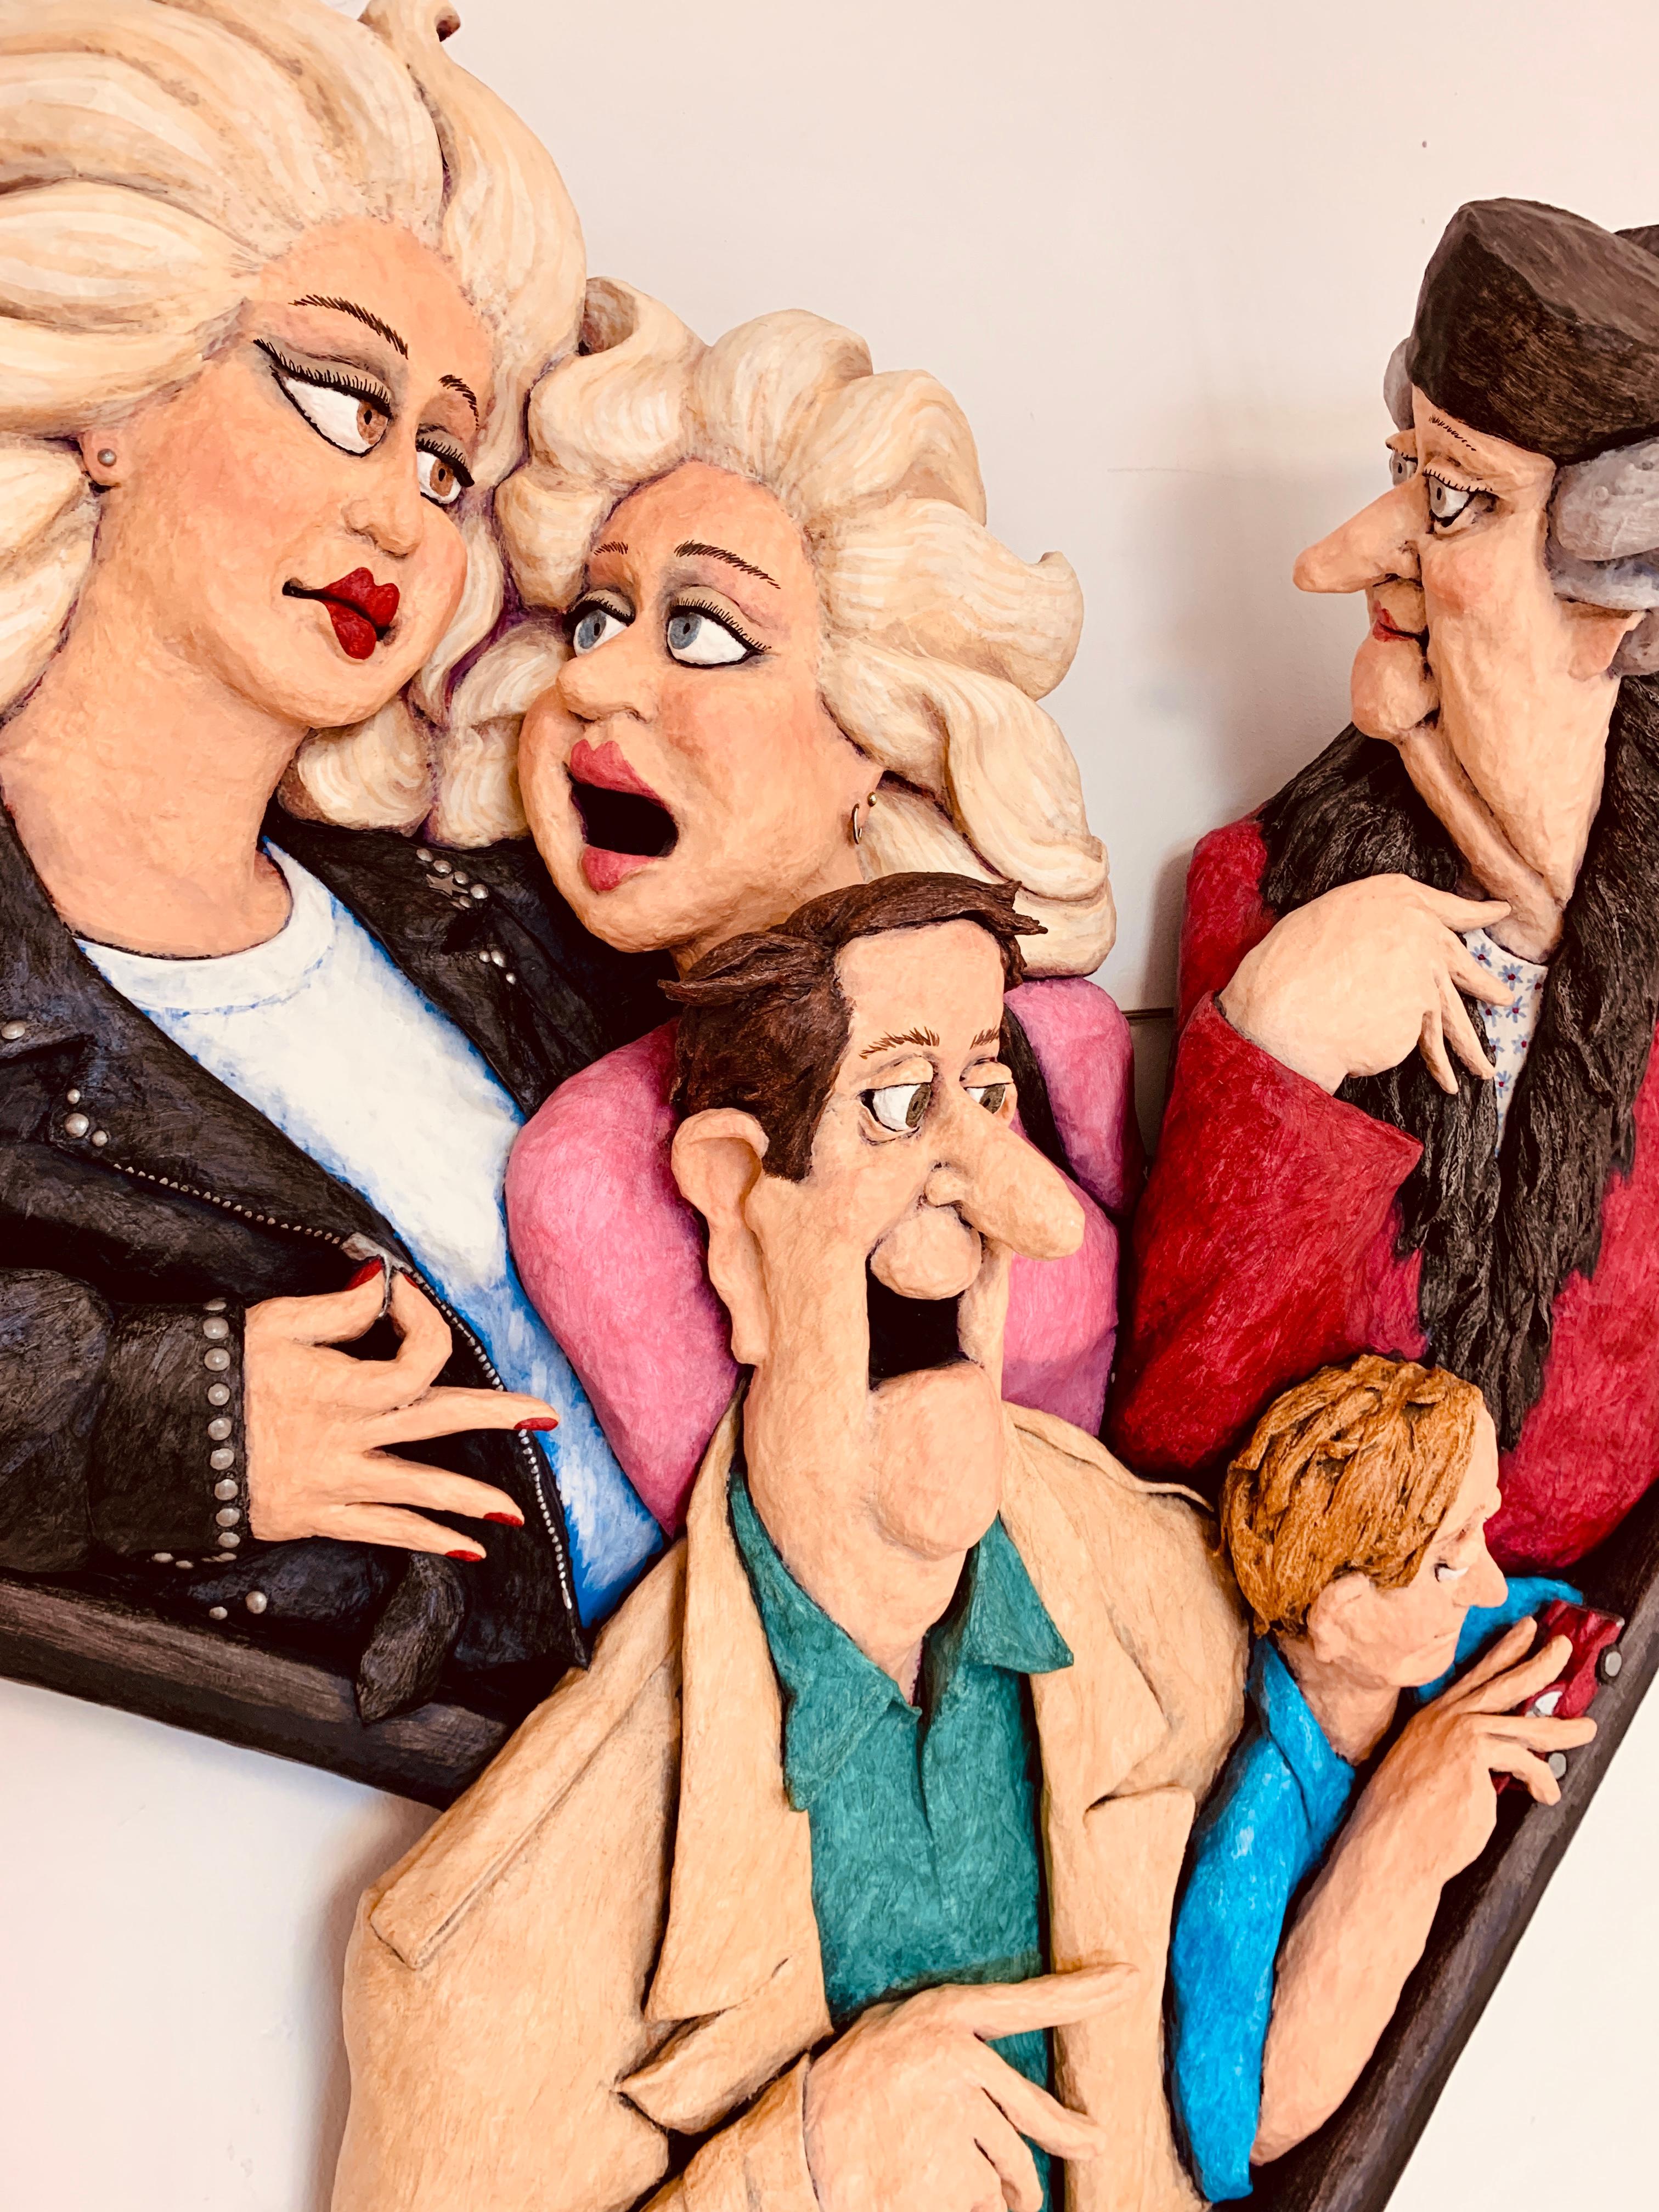 For your consideration is an amusing and humorous papier sculpture depicting a group of interesting characters by artist Stephen Hansen. Dimensions: 43w x 34.5d x 5.5d. In excellent condition. A Seattle native, Stephen Hansen moved to New Mexico in